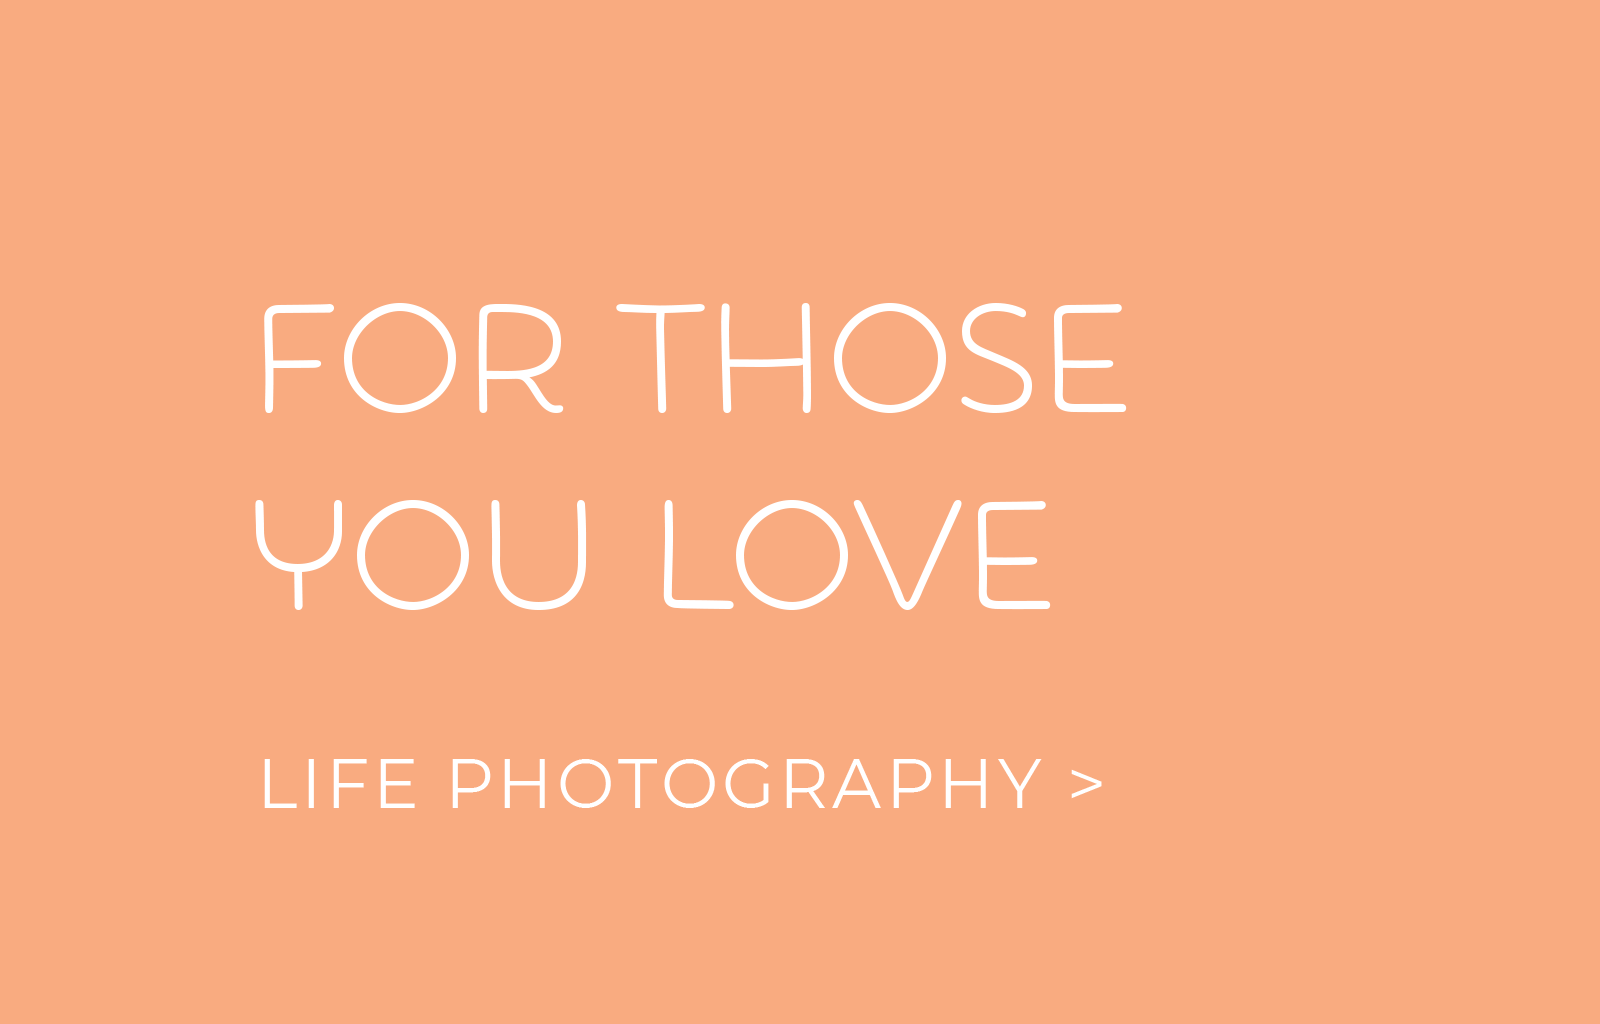 For those you love LIFE PHOTOGRAPHY >